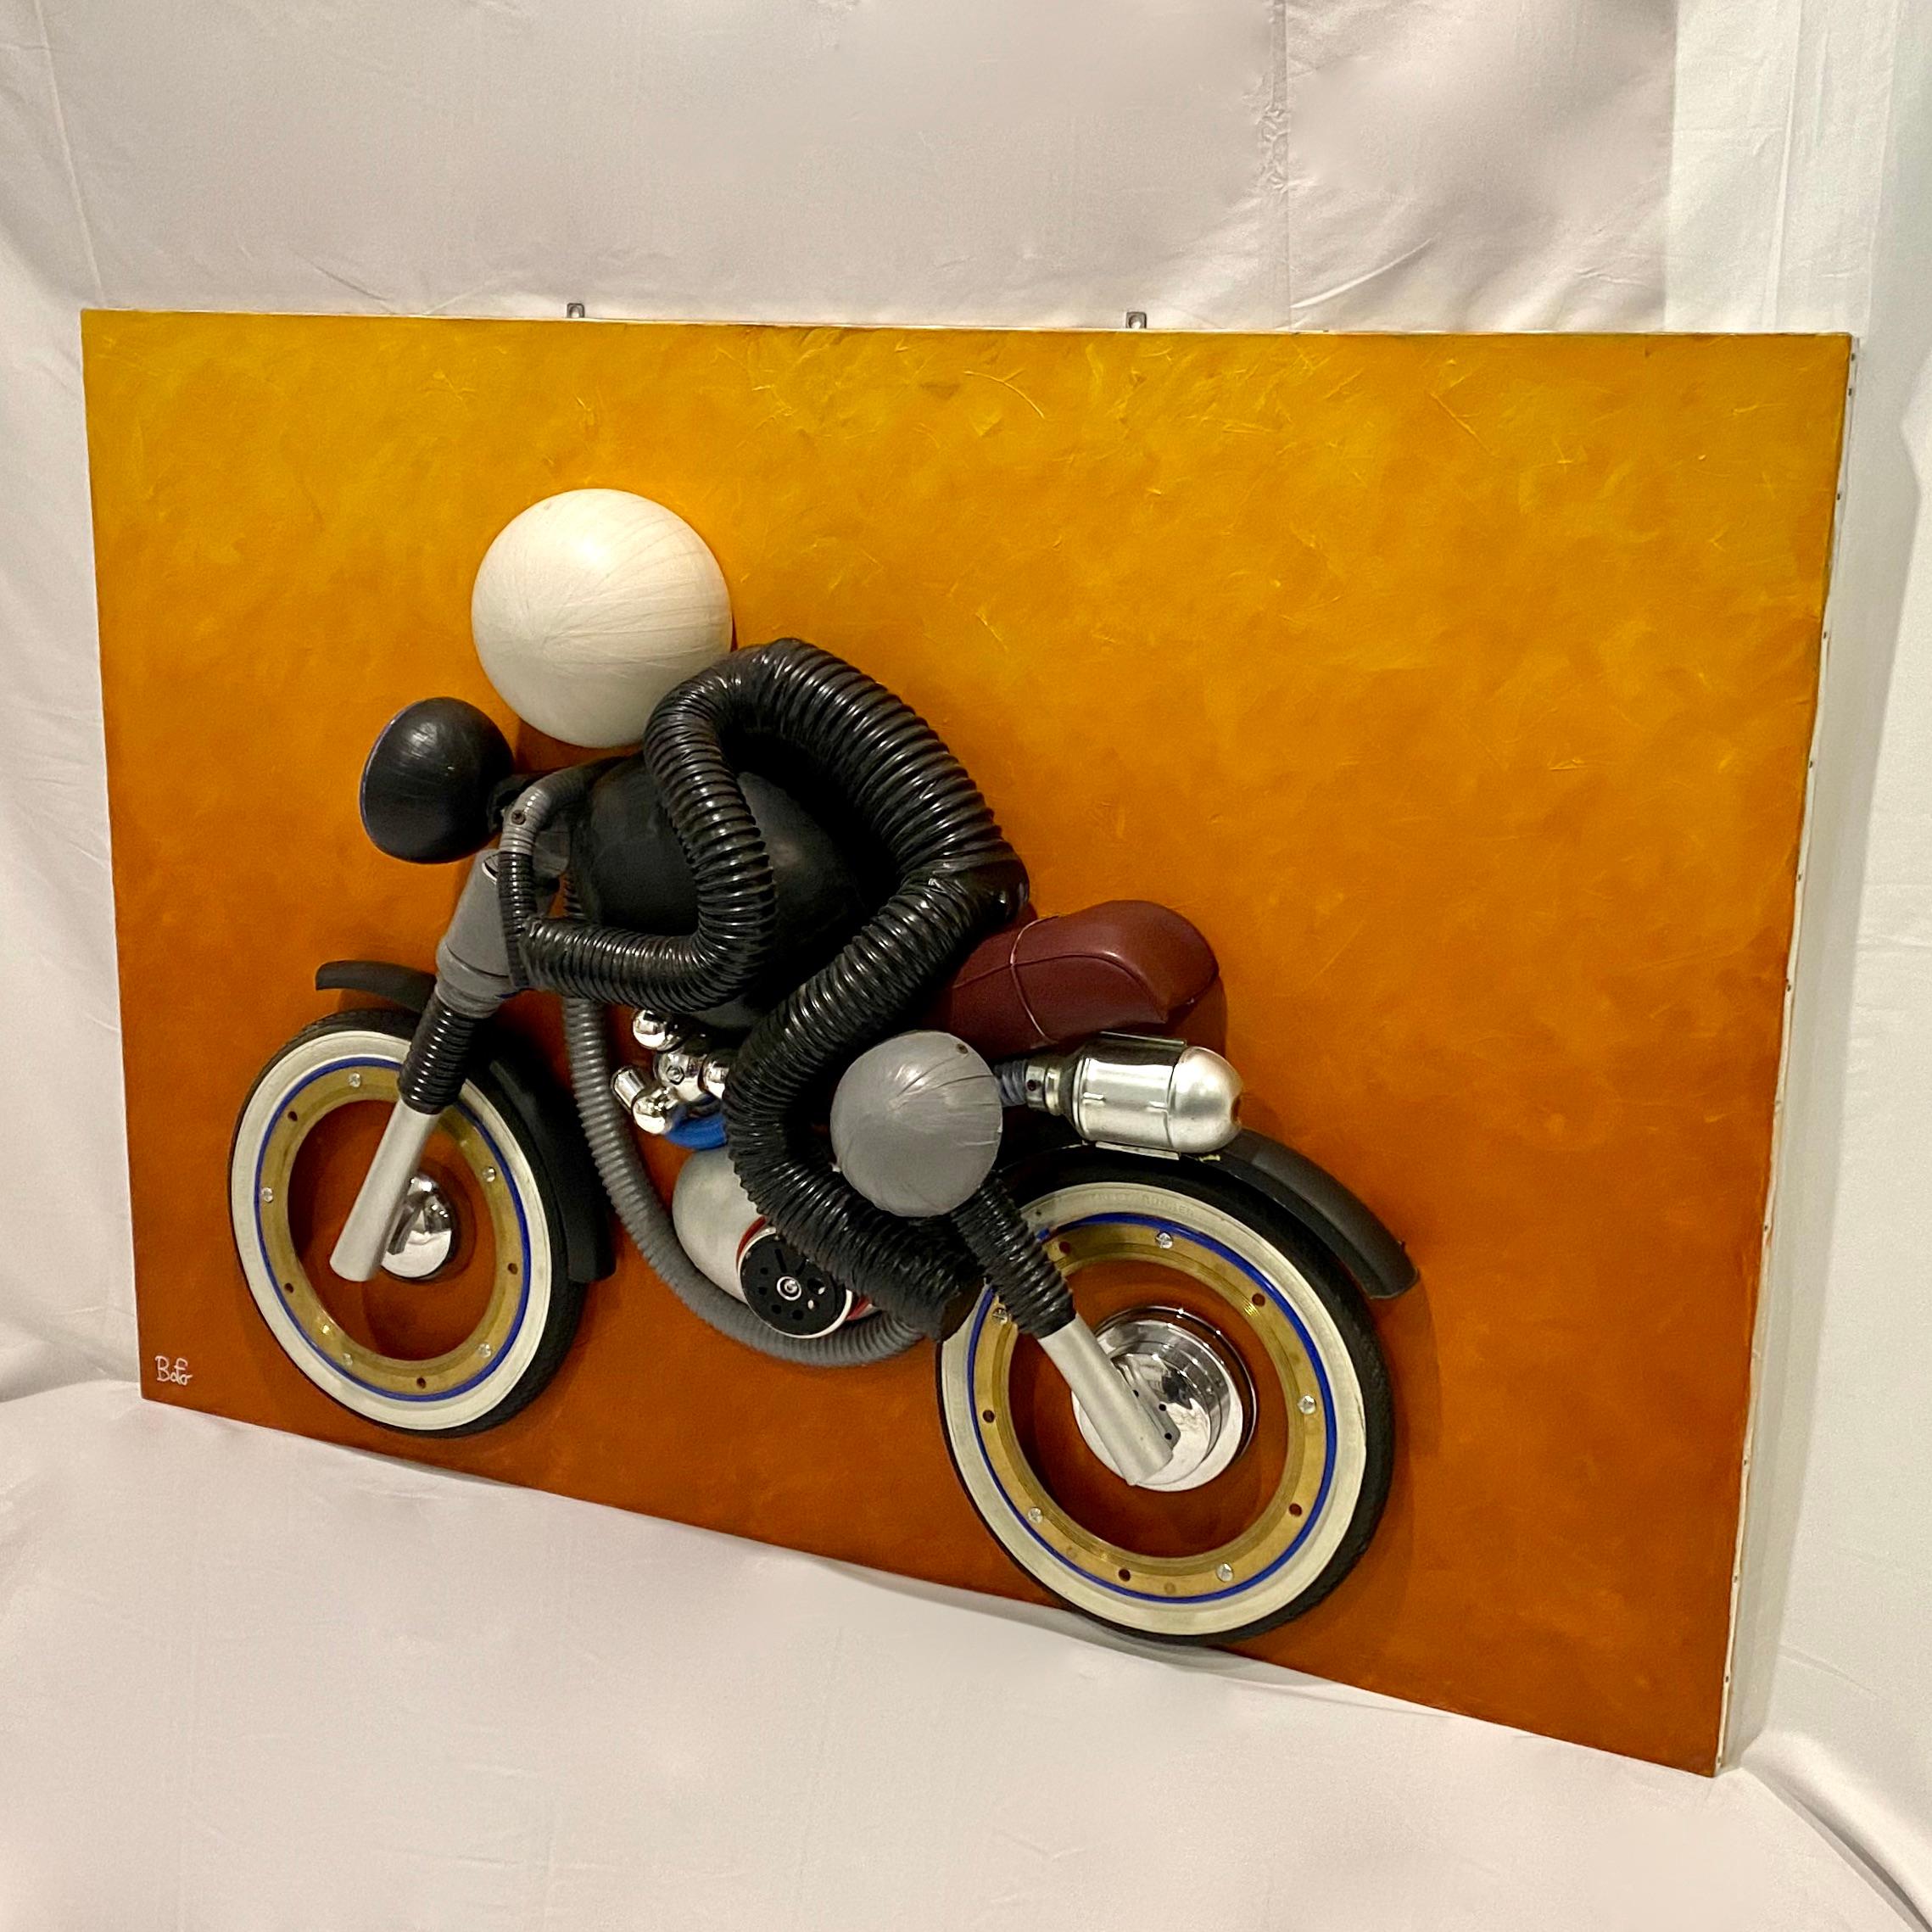 Modern Contemporary Italian Found Objects Recycled Art Sculpture of a Biker Signed Bafo For Sale